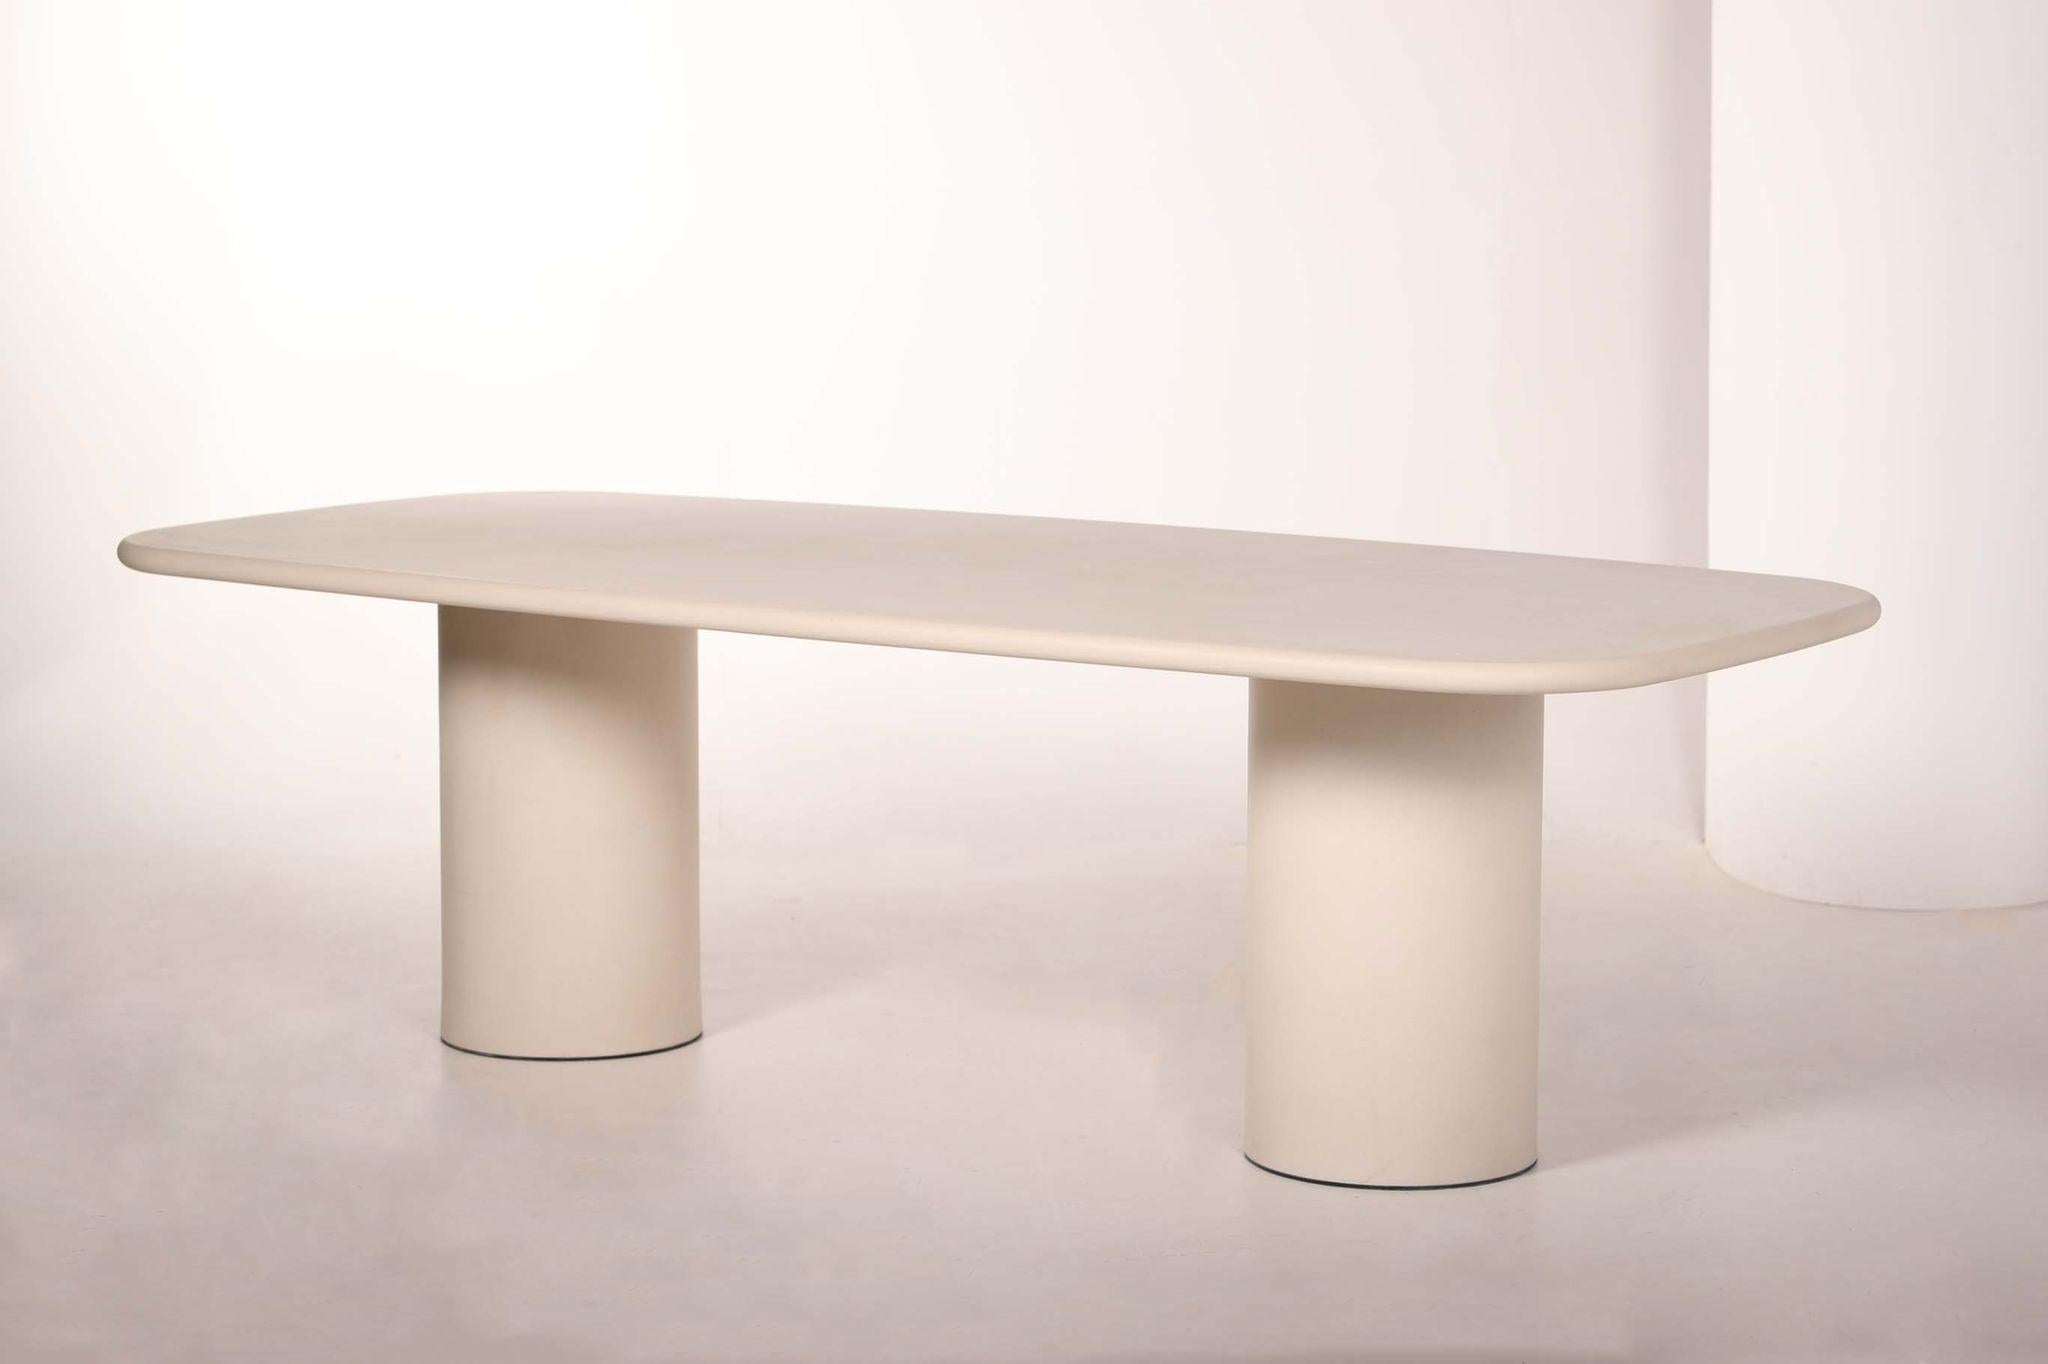 Natural Plaster Hand-Sculpted Outdoor dining table 360 by Philippe Colette
Dimensions: L 360 x W 110 cm
Customized height, please contact us.
10/12 pers.
Materials: Mineral lime plaster.

Our tables are in mineral lime plaster, unlike mortex,